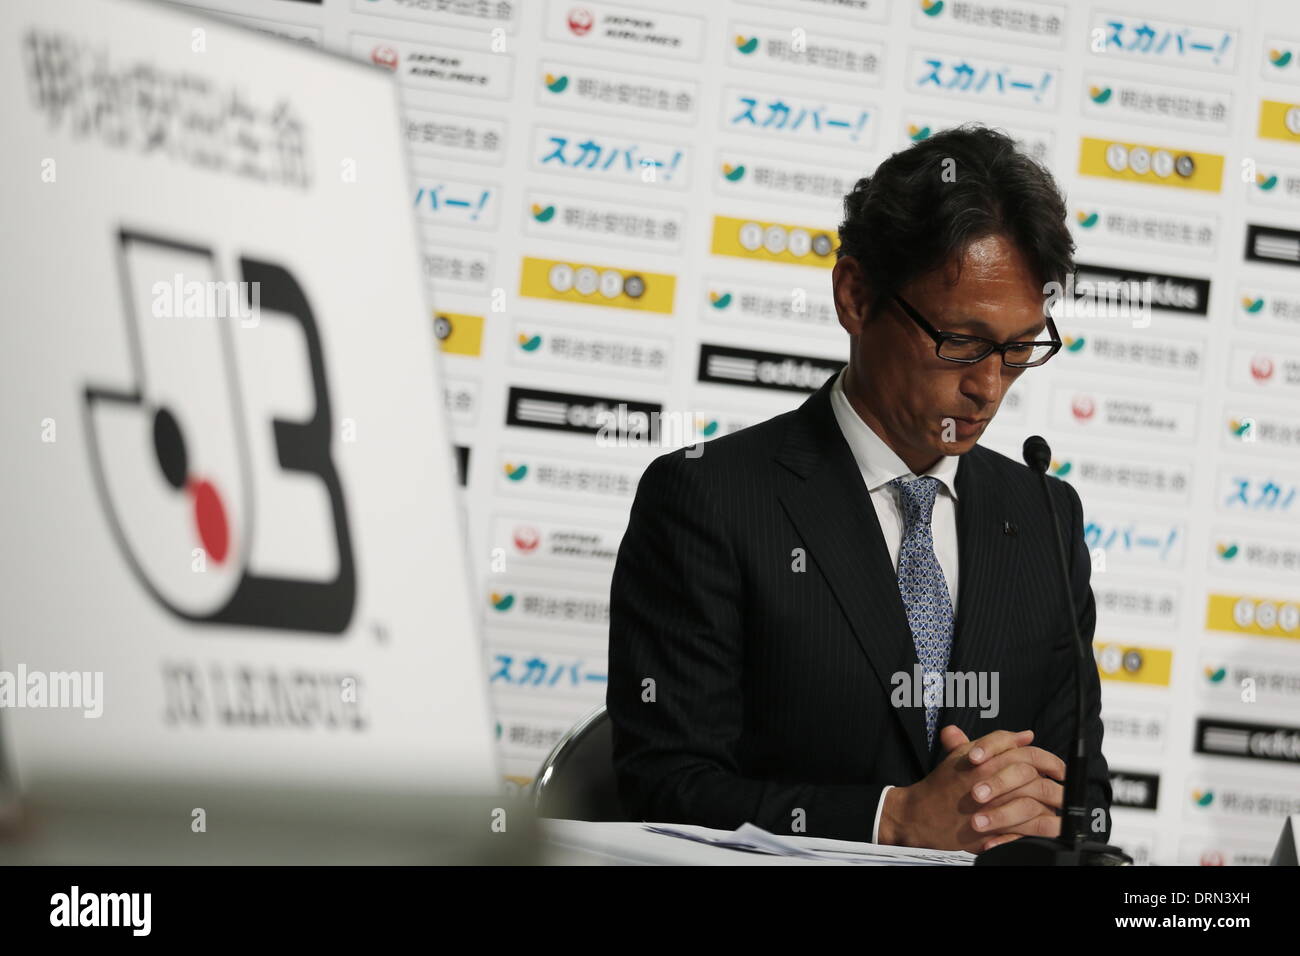 Tokyo Japan 29th Jan 14 Tsutomu Takahata Football Soccer The Press Conference For J3 League Starting From 14 At Jfa House In Tokyo Japan C Aflo Sport Alamy Live News Stock Photo Alamy